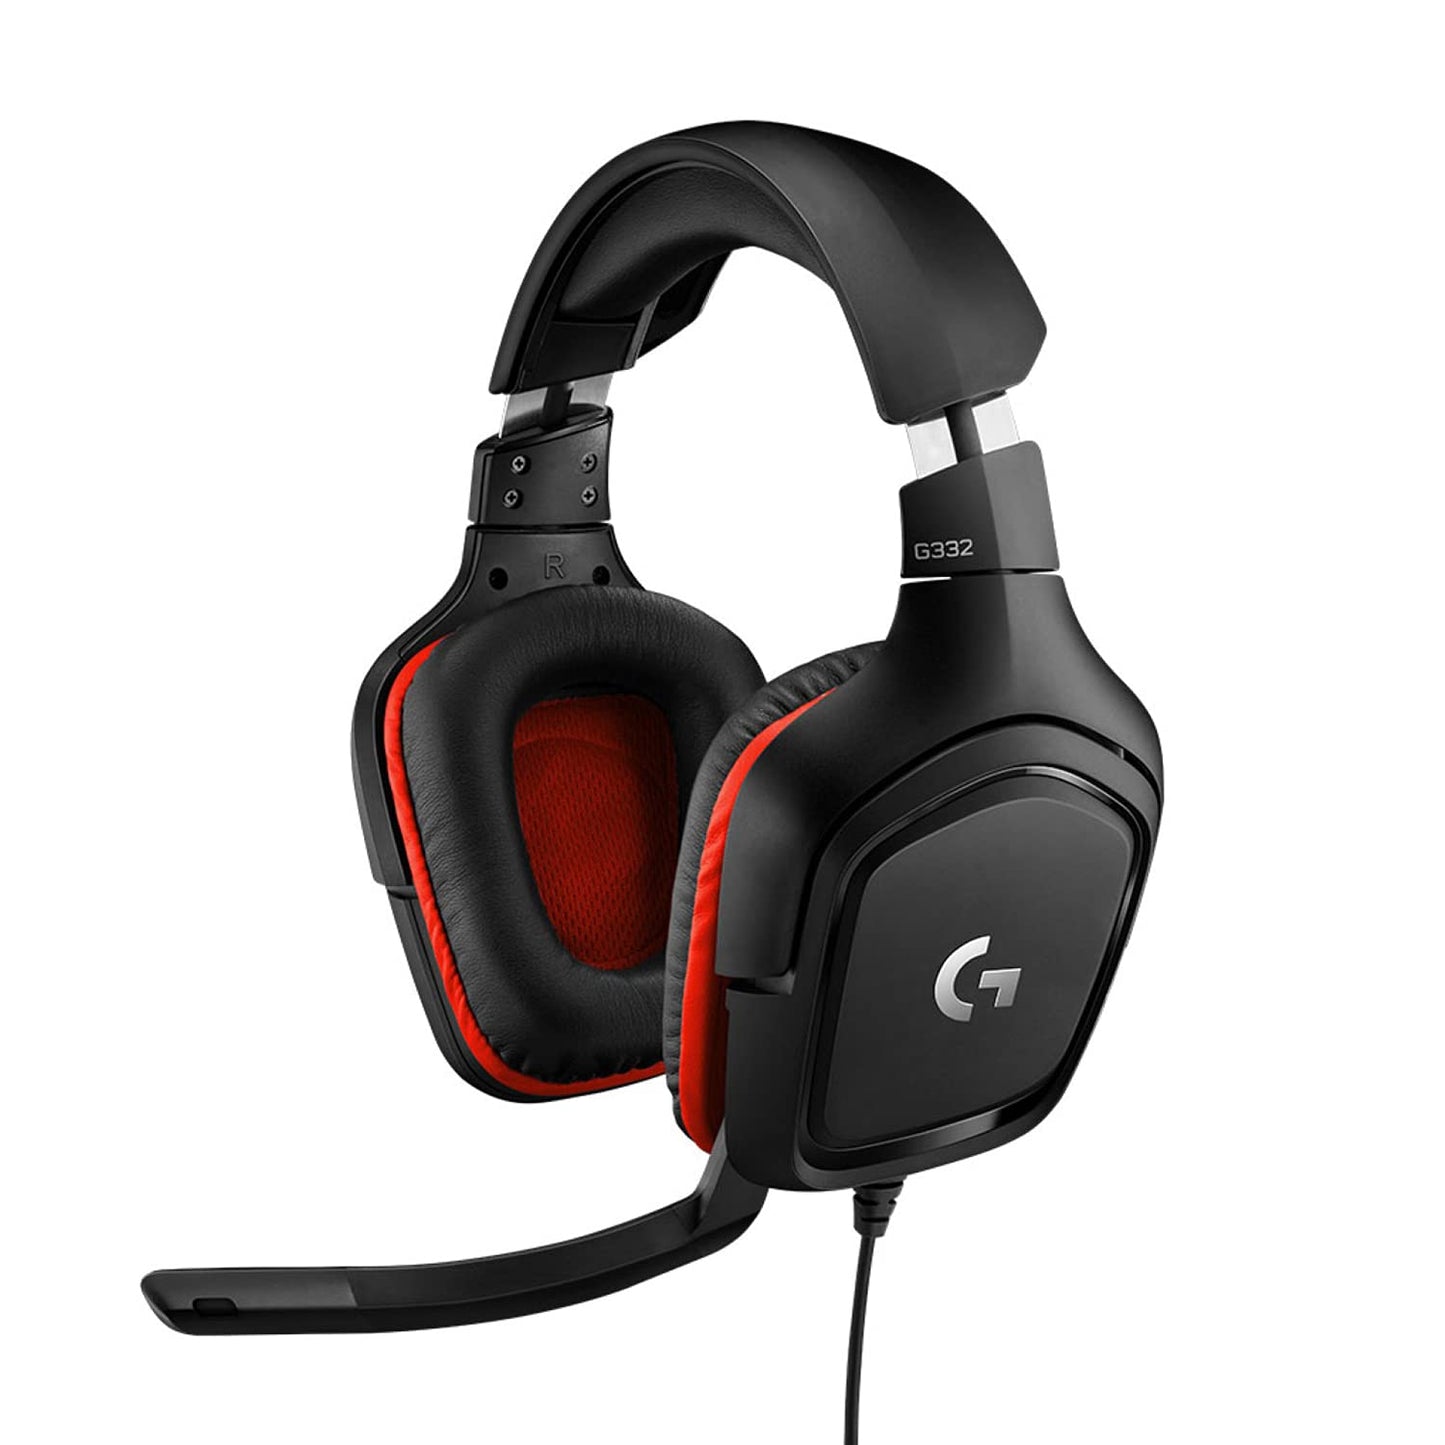 Logitech G G332 Wired On-Ear Gaming Headset, 50mm Audio Drivers, 6mm Add-on Mute Microphone, 2m Cable Length, Black